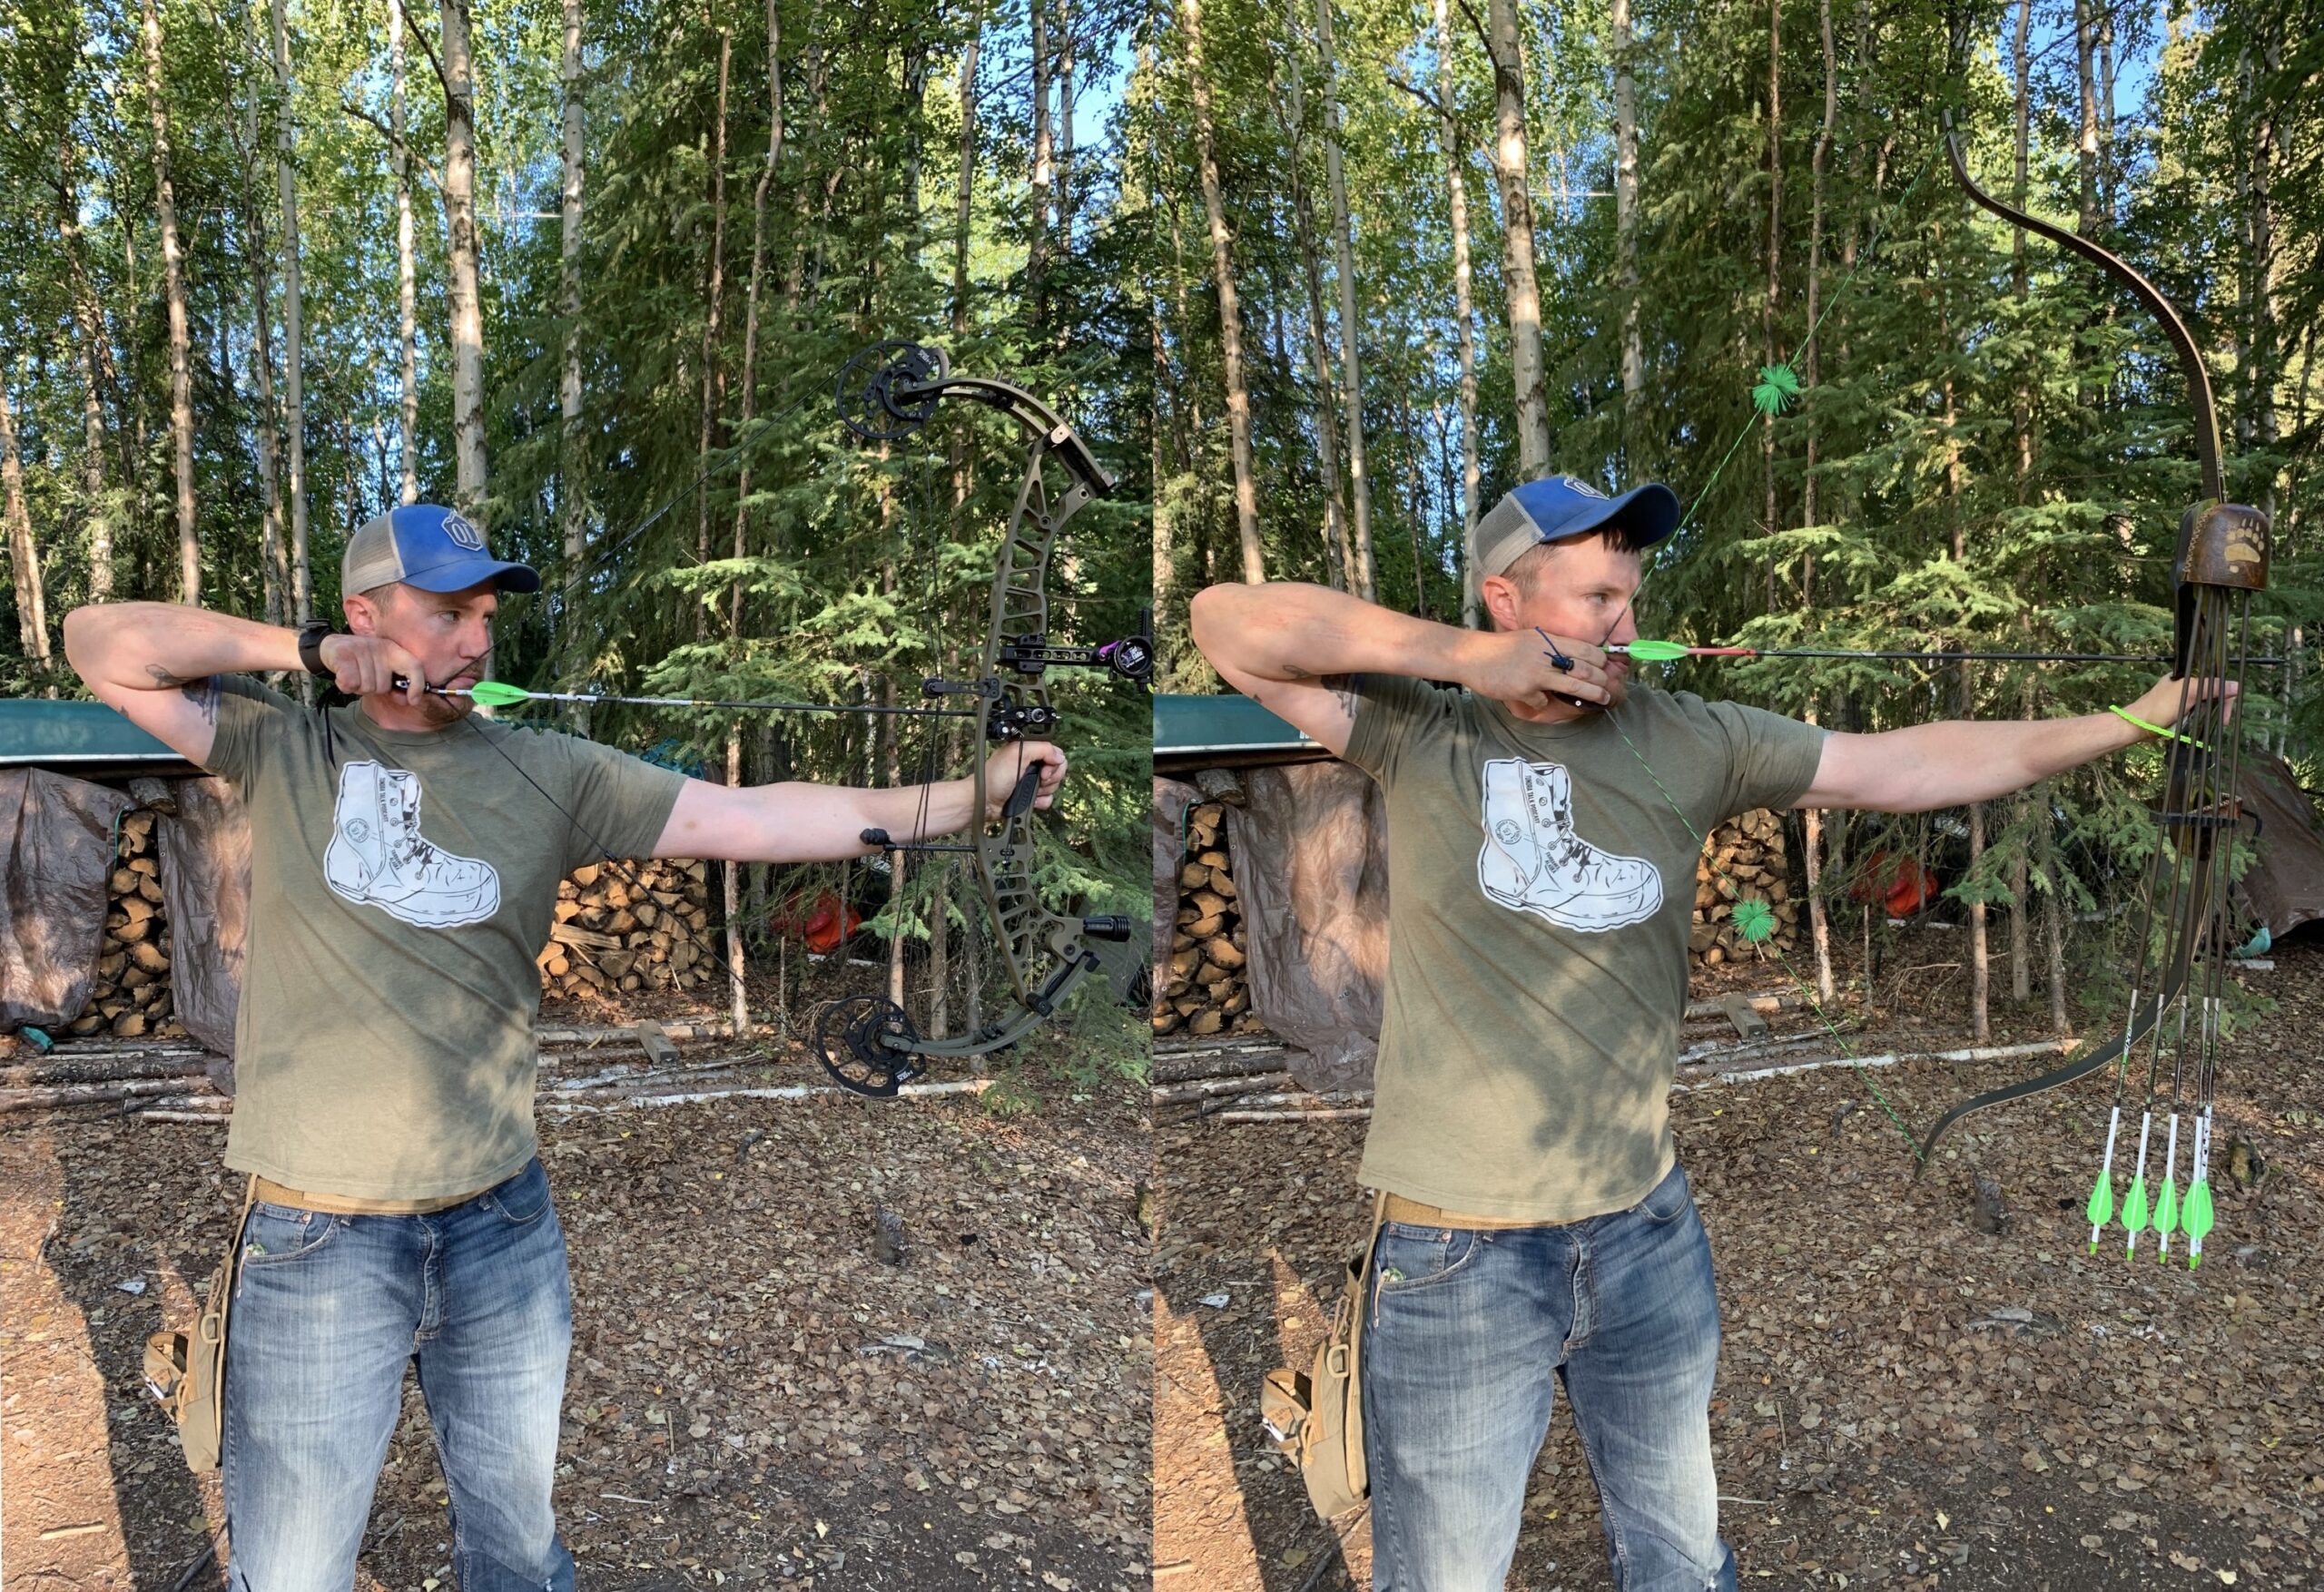 At full draw with a compound and recurve bow